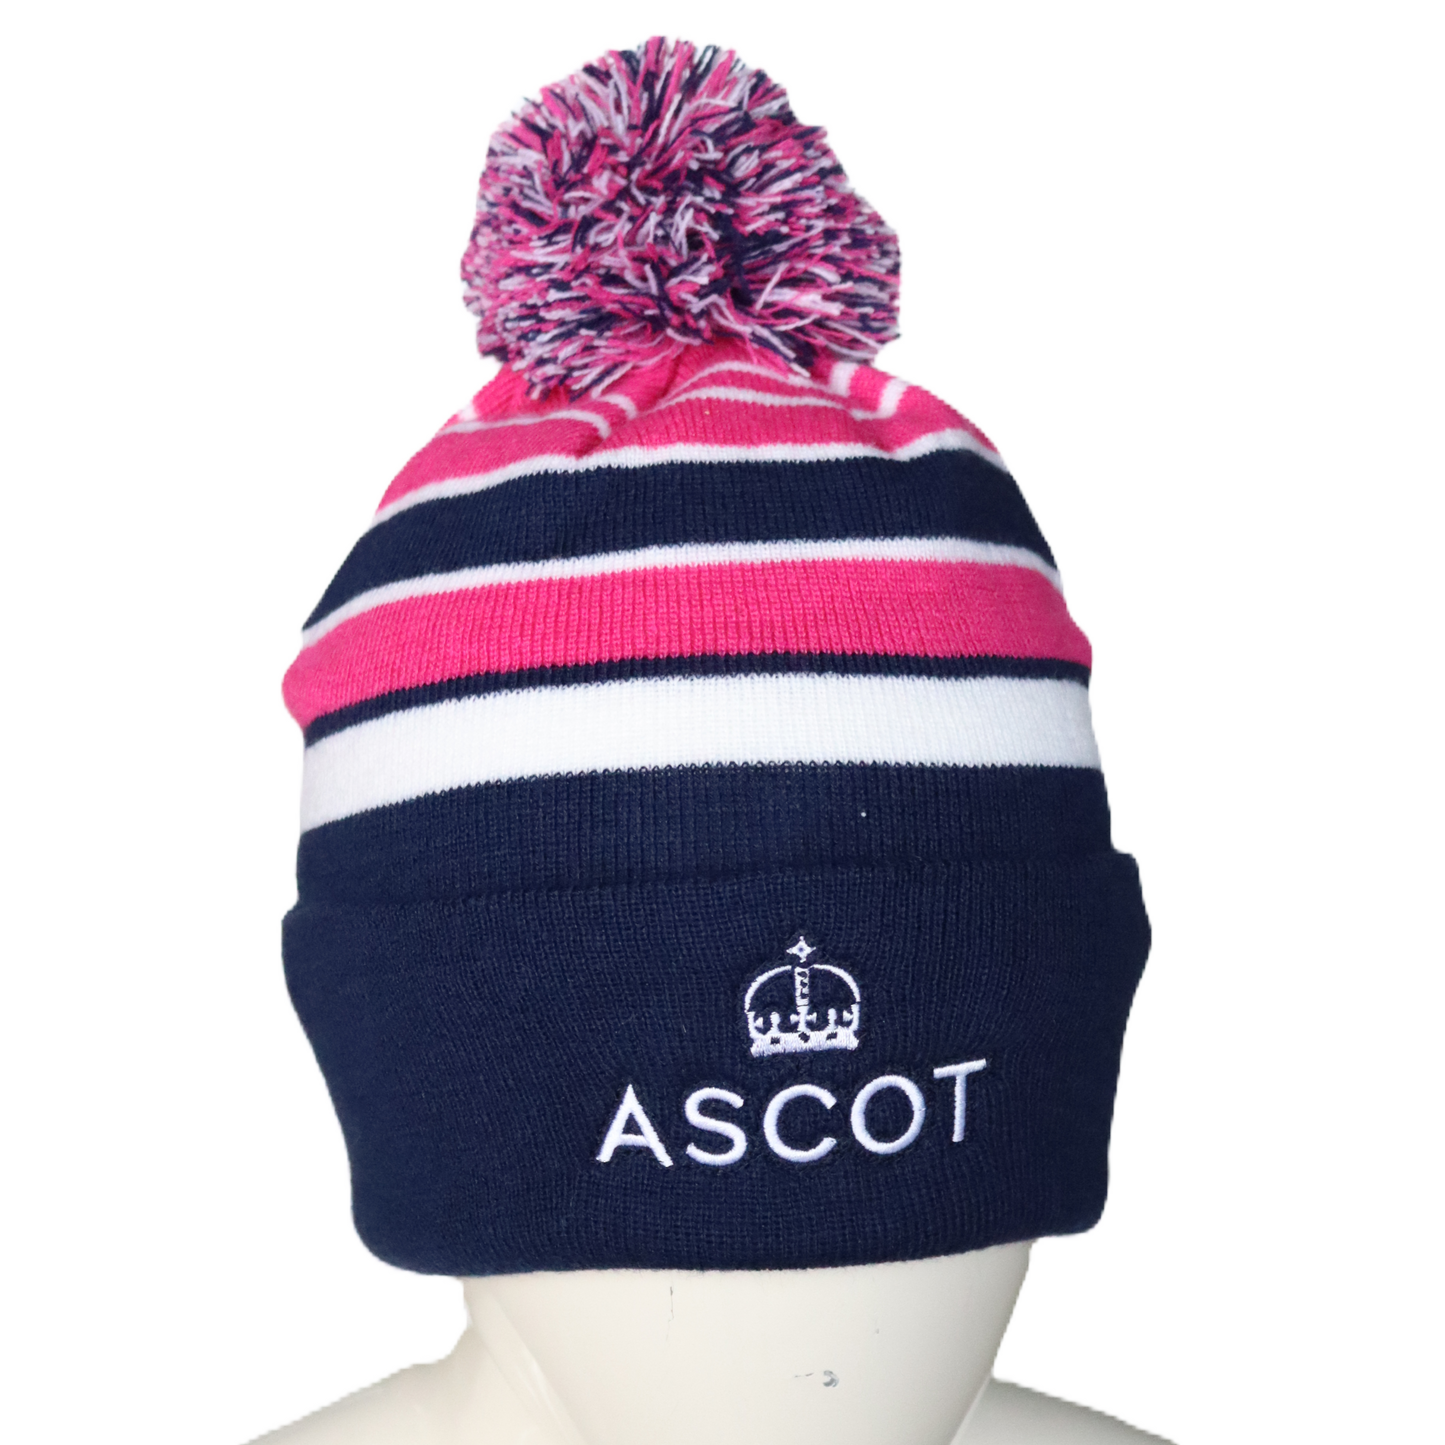 Ascot Logo Beanie with Bobble - Pink/Navy